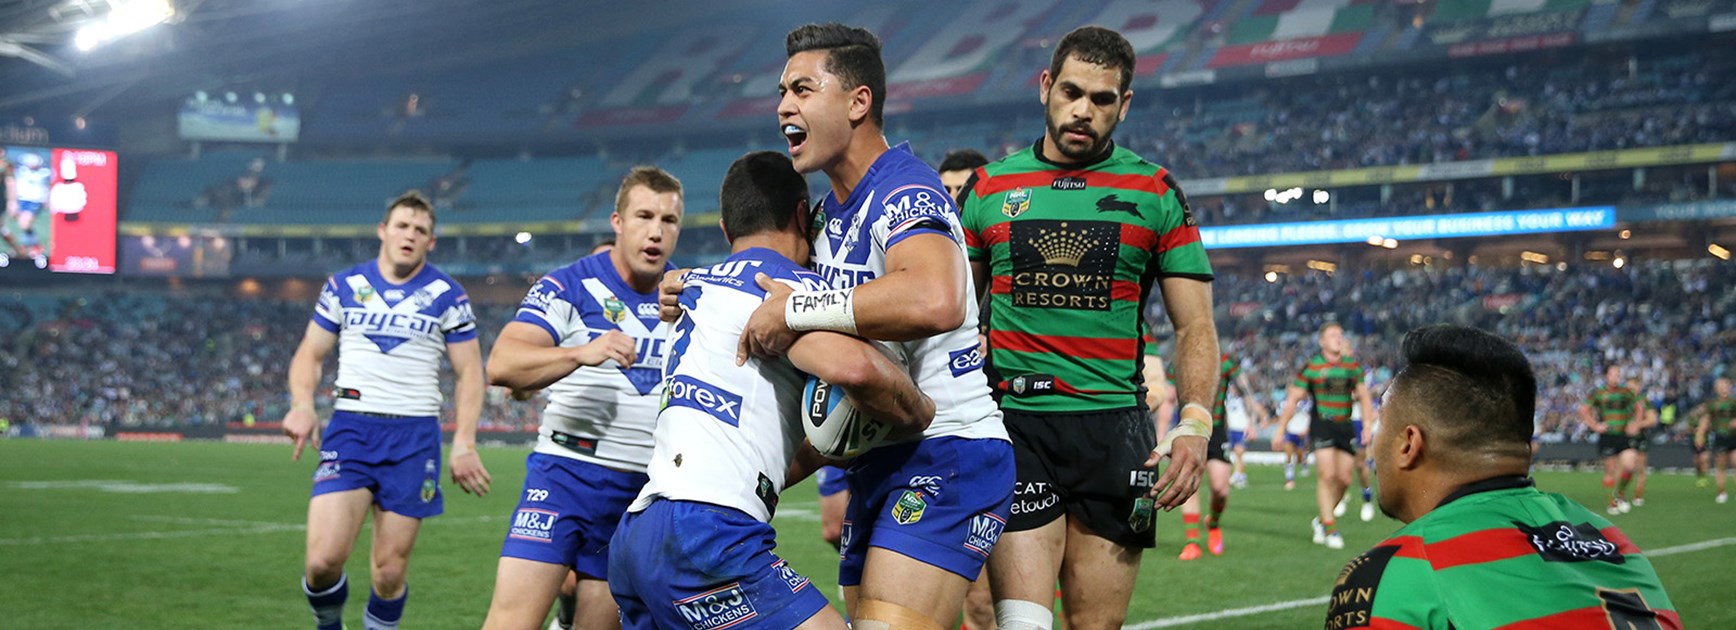 Bulldogs players celebrate another try as Greg Inglis looks on dejected.